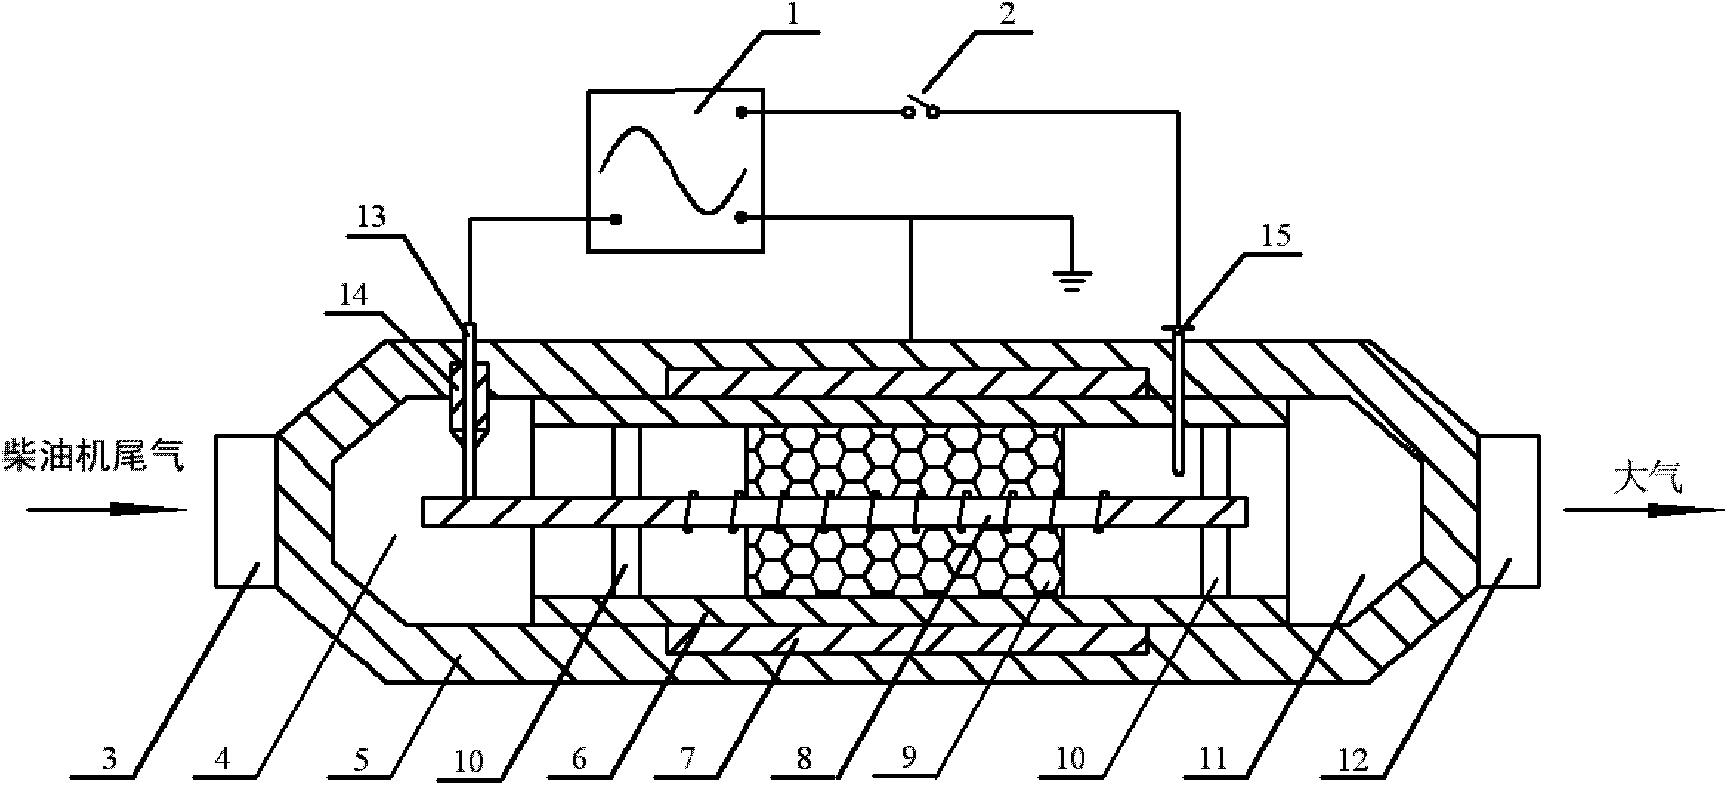 Integral reactor of dielectric barrier discharge coupling catalyst for removing NOx in diesel engine